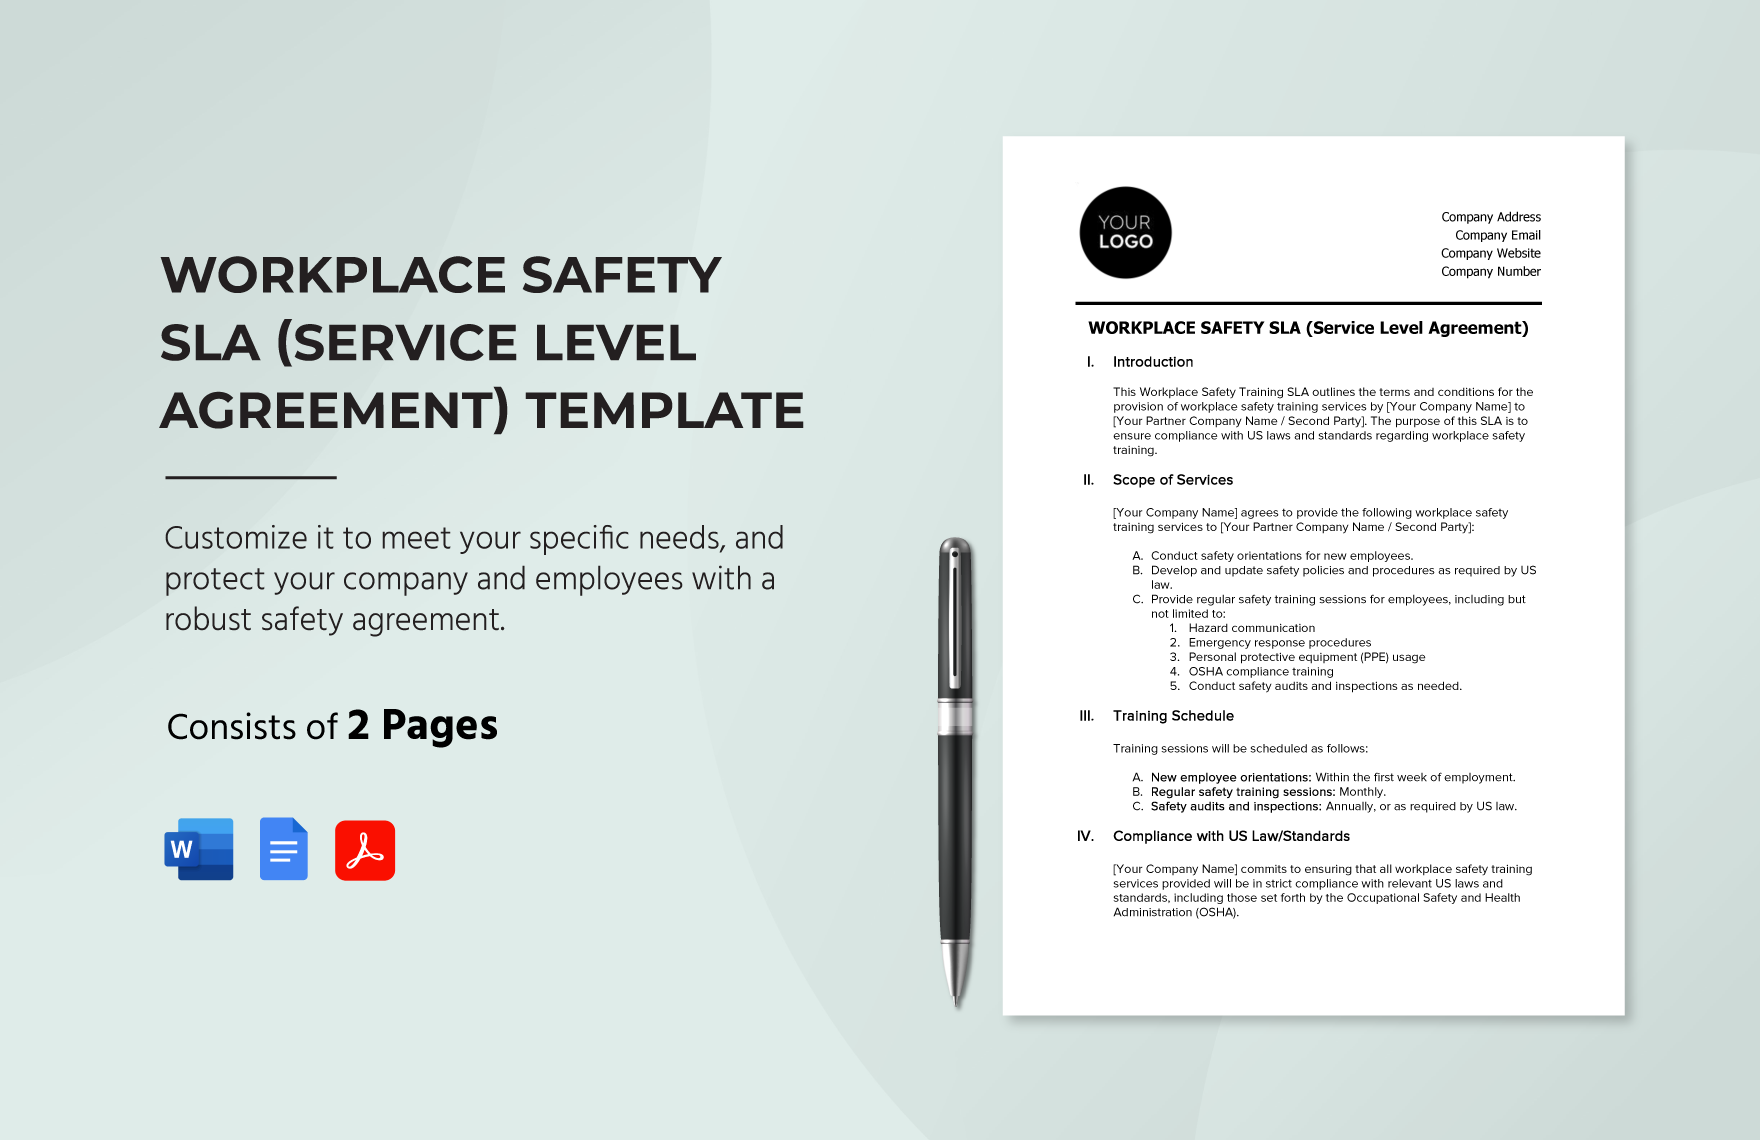 Workplace Safety SLA (Service Level Agreement) Template